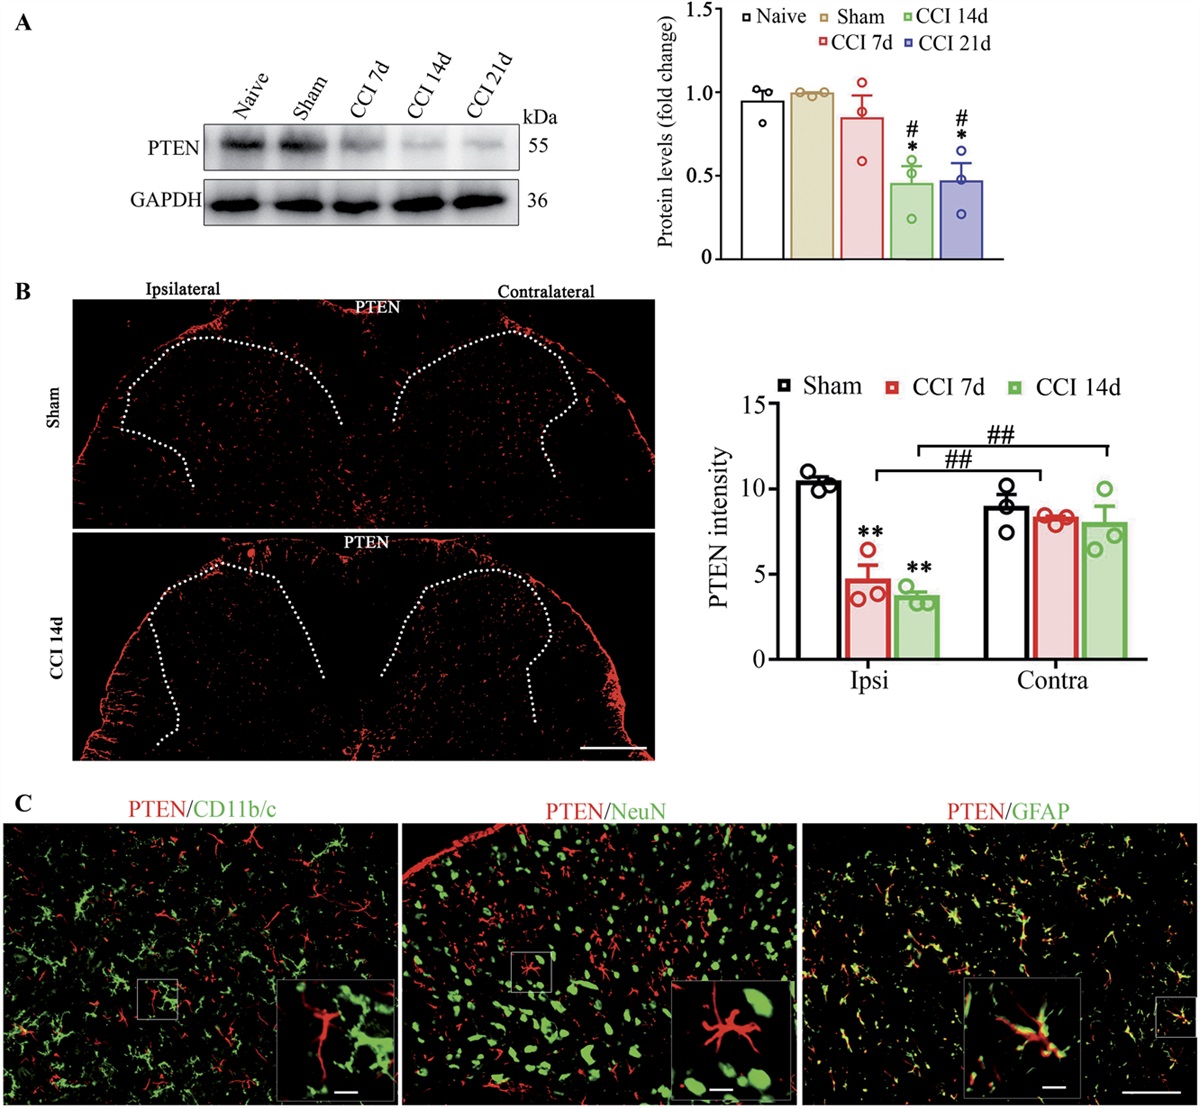 Astrocytic phosphatase and tensin homolog deleted on chromosome 10 regulates neuropathic pain by facilitating 3-hydroxy-3-methylglutaryl-CoA reductase–dependent cholesterol biosynthesis